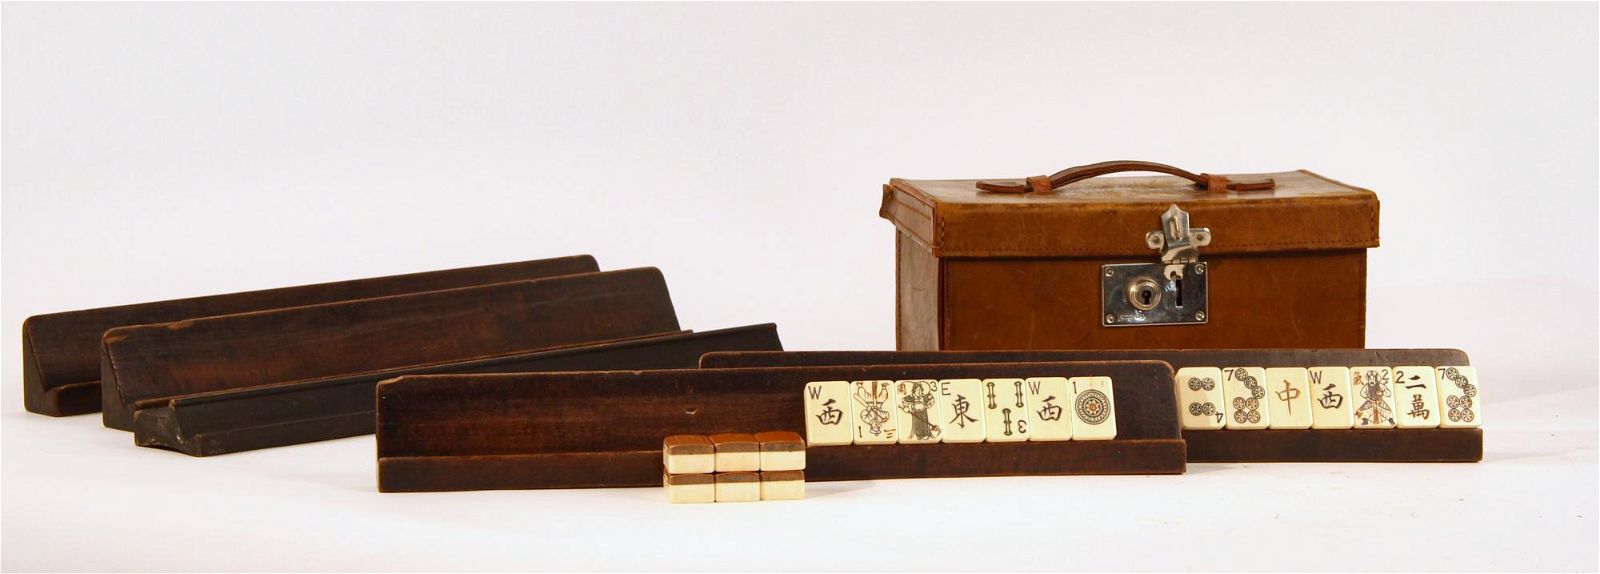 A MAHJONG SET IN A LEATHER TRAVELING